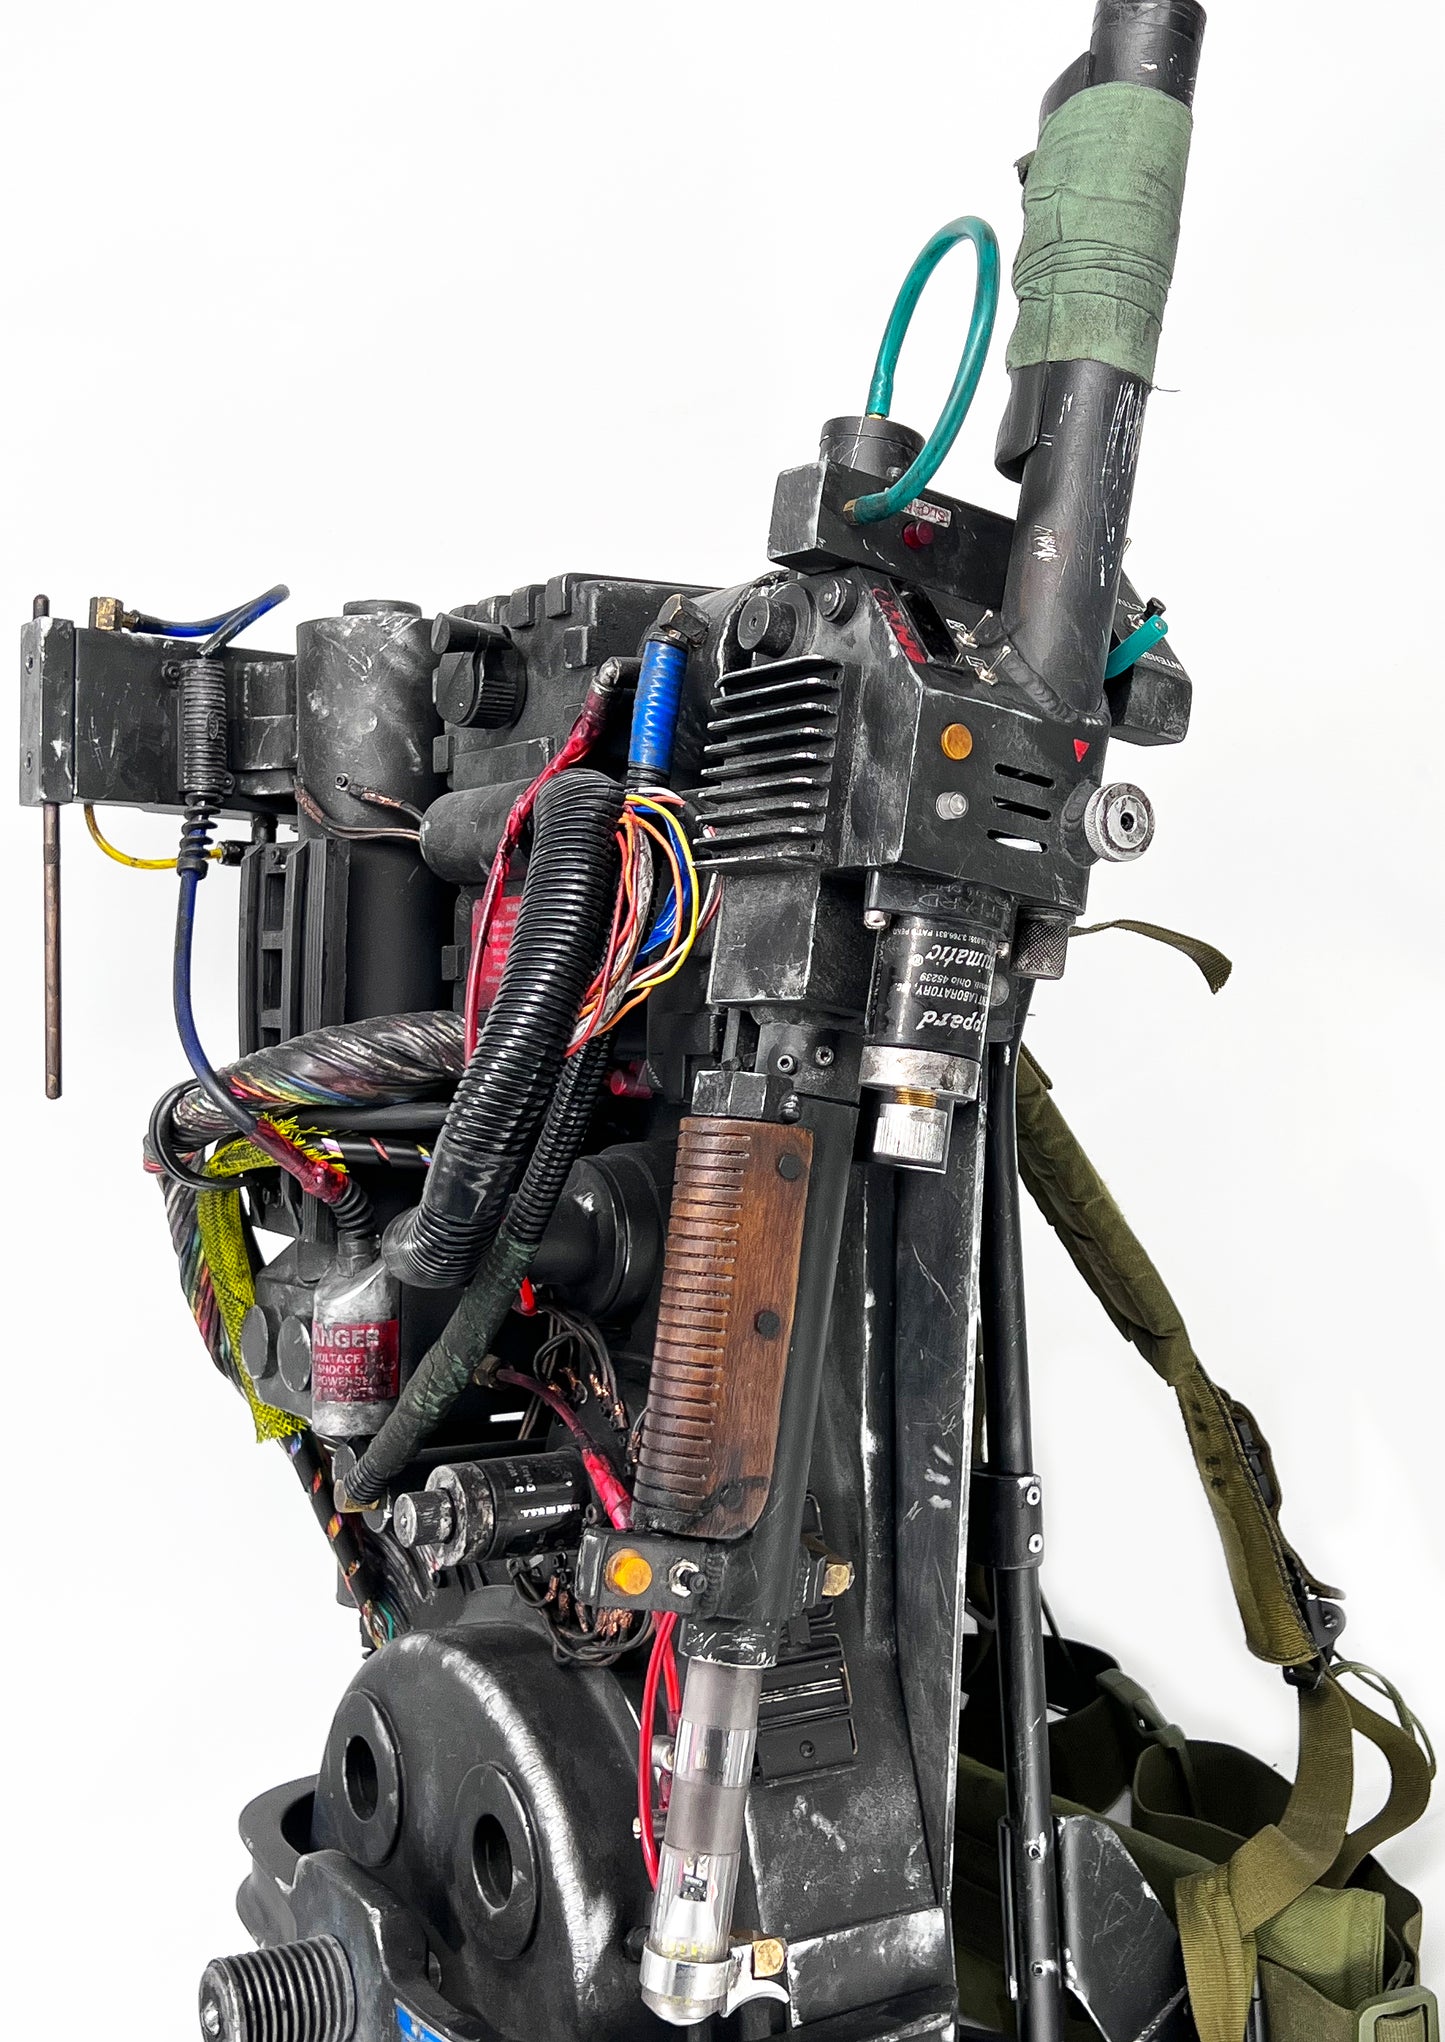 - The '21 Proton Pack -